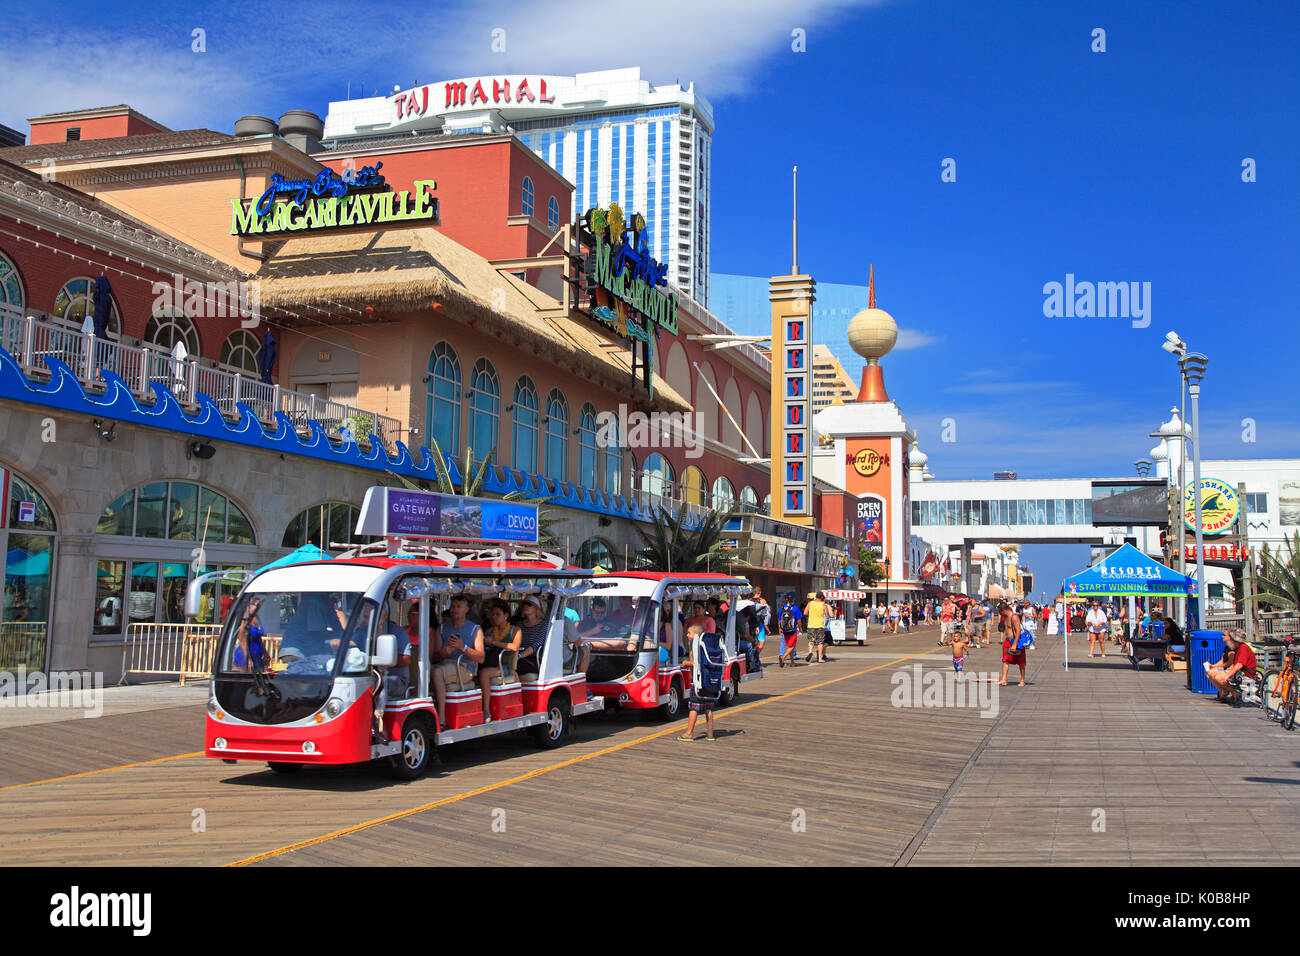 ATLANTIC CITY, NEW JERSEY - AUGUST 19, 2017: Tourists traveling on the boardwalk in Atlantic City. Established in the 1800s as a health resort, today Stock Photo